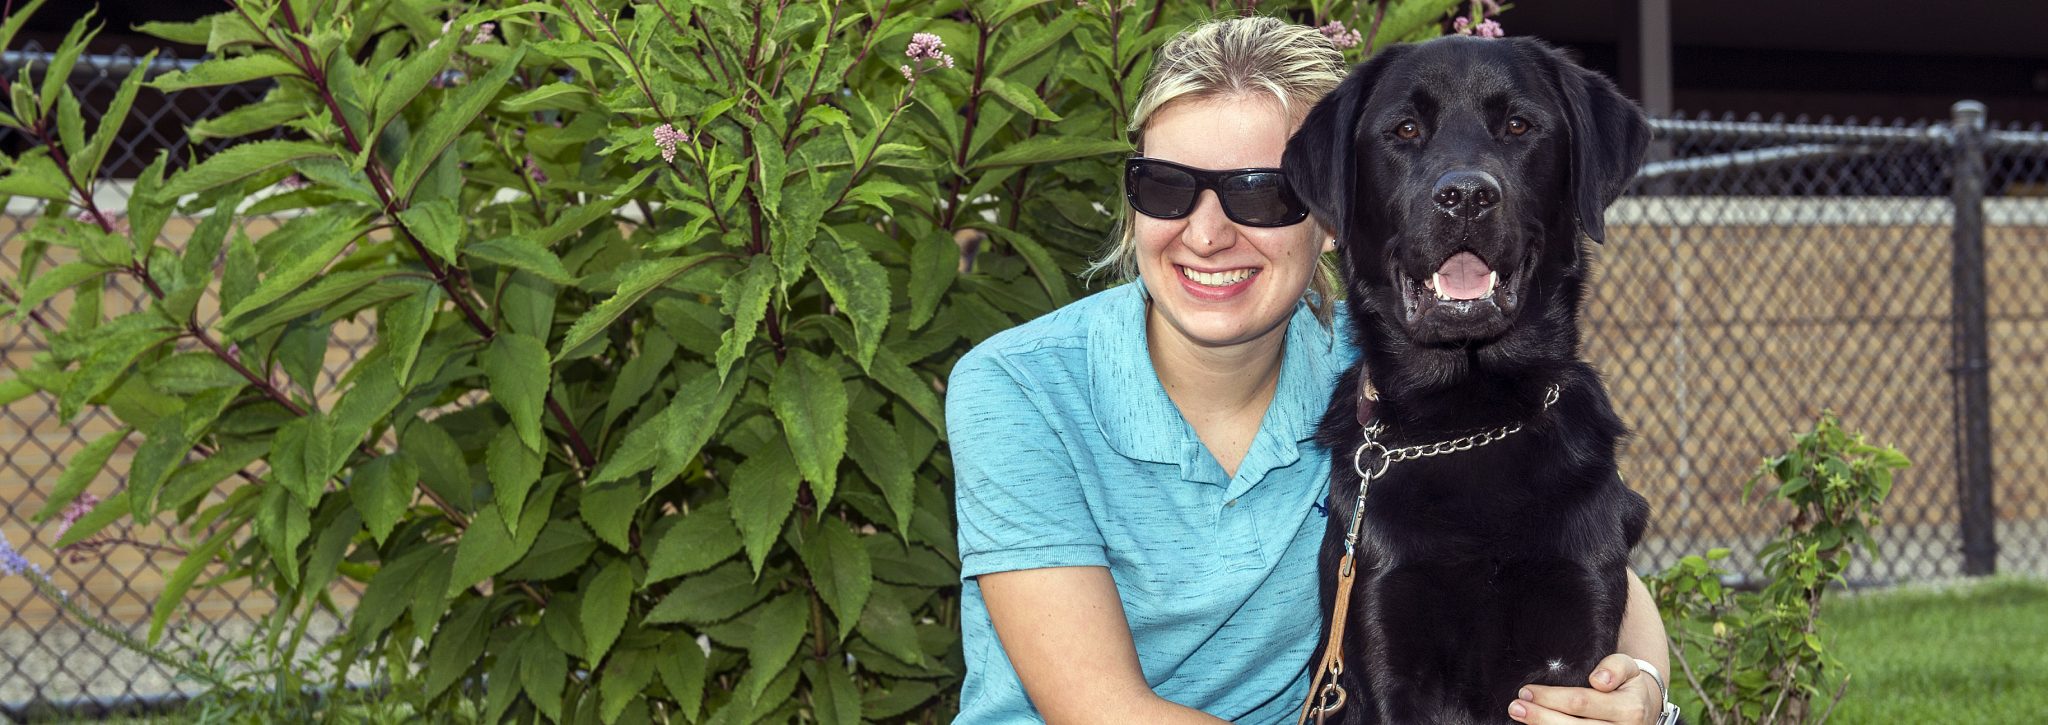 Photo of a smiling woman wearing sunglasses and sitting or kneeling in front of a bush. She has her arms around the black Labrador sitting next to her. The dog is sitting and looking directly at the camera with tongue slightly out.